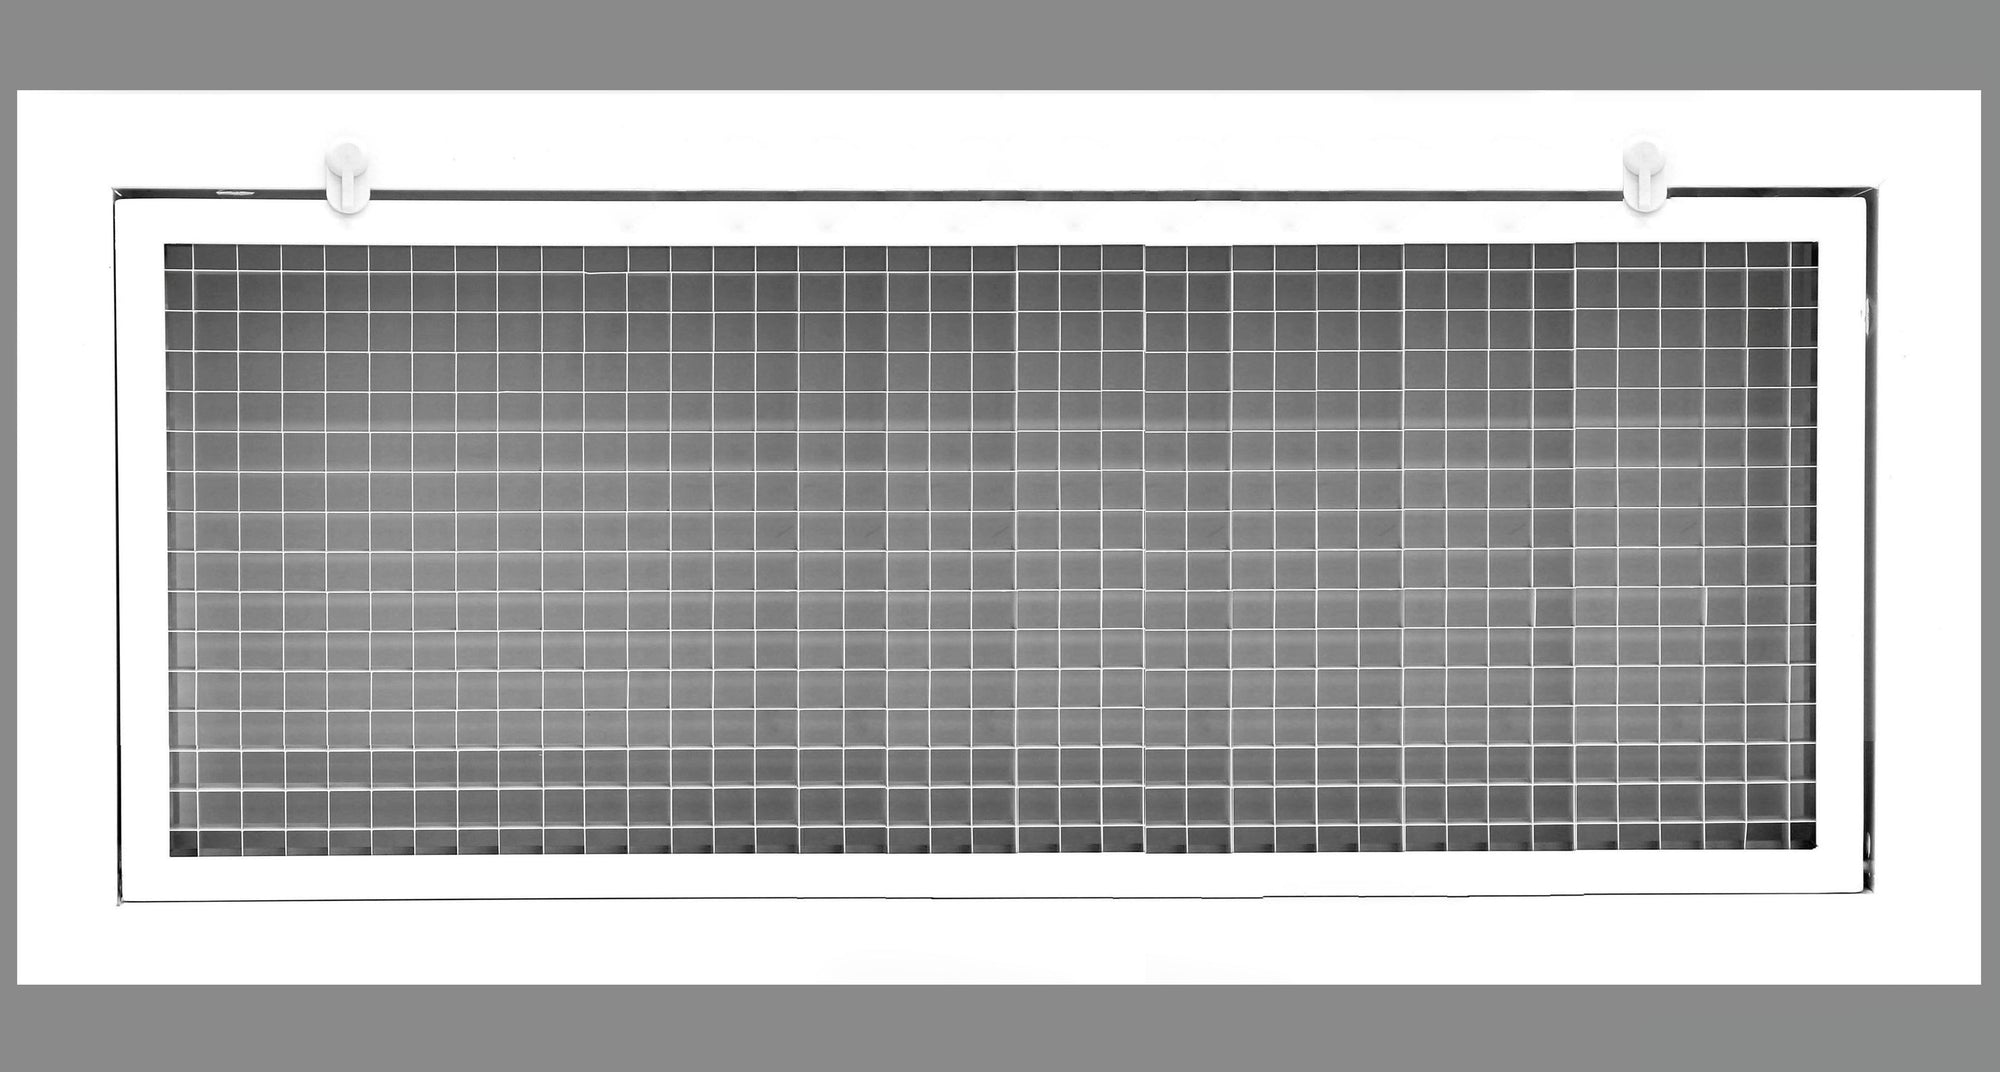 28" x 8" Cube Core Eggcrate Return Air Filter Grille for 1" Filter